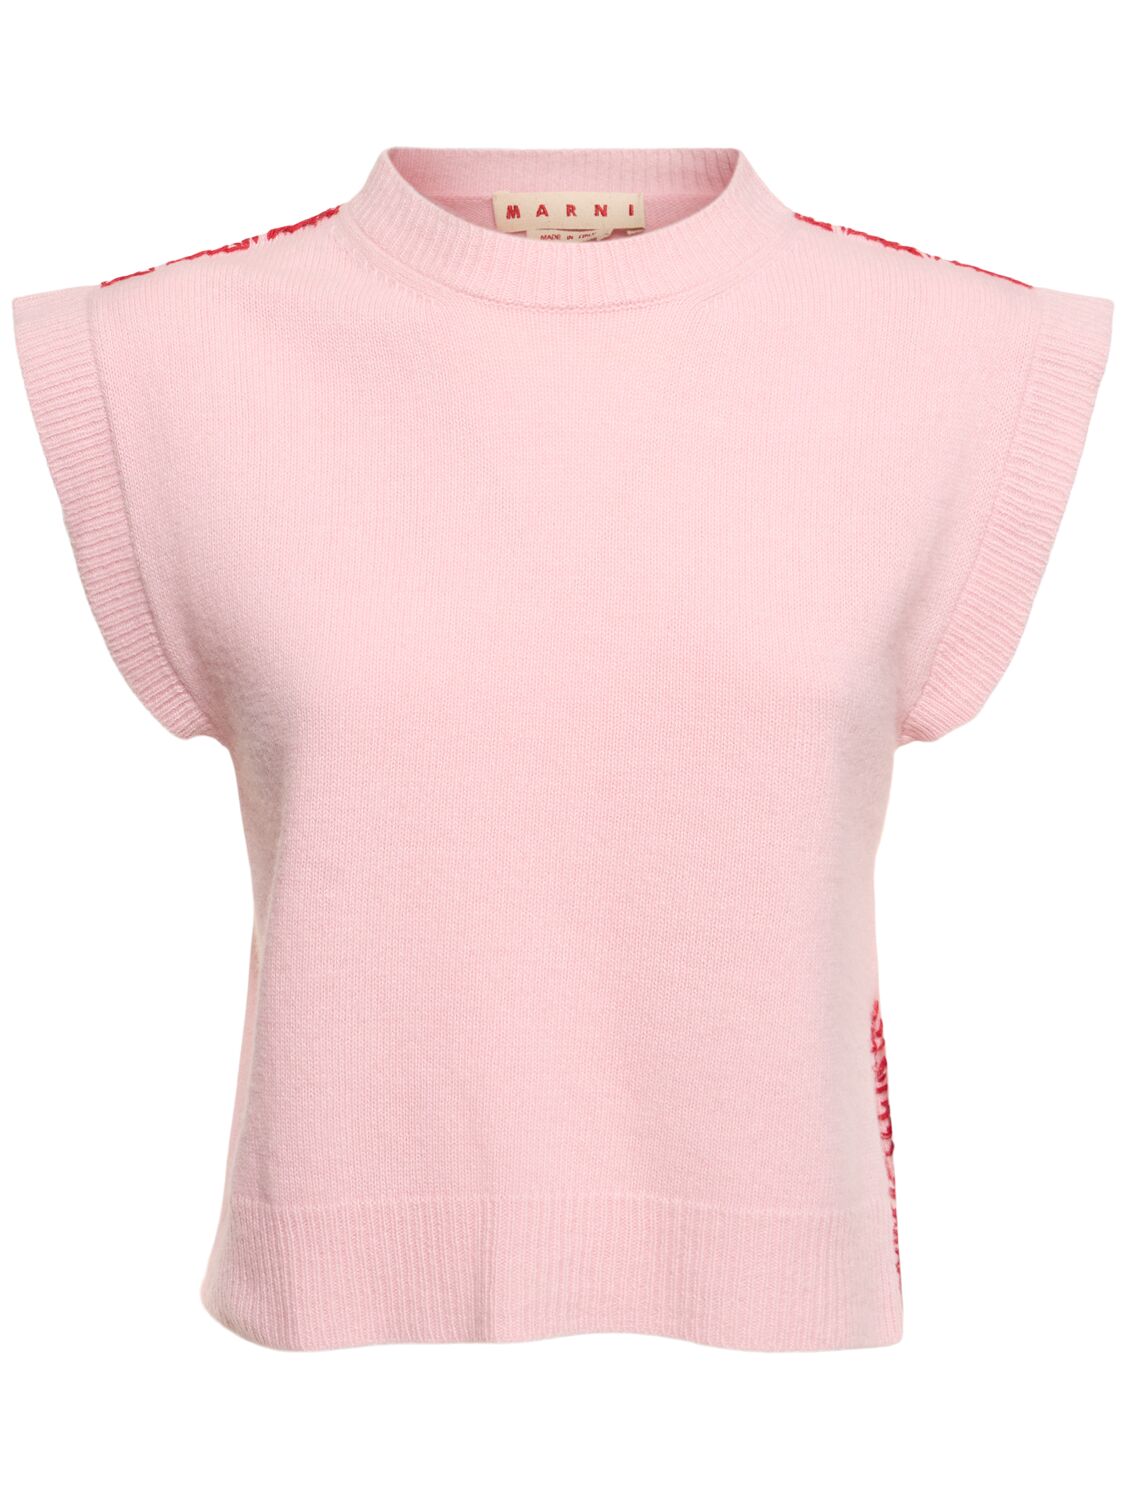 Marni Wool & Cashmere Knit Logo Vest In Pink